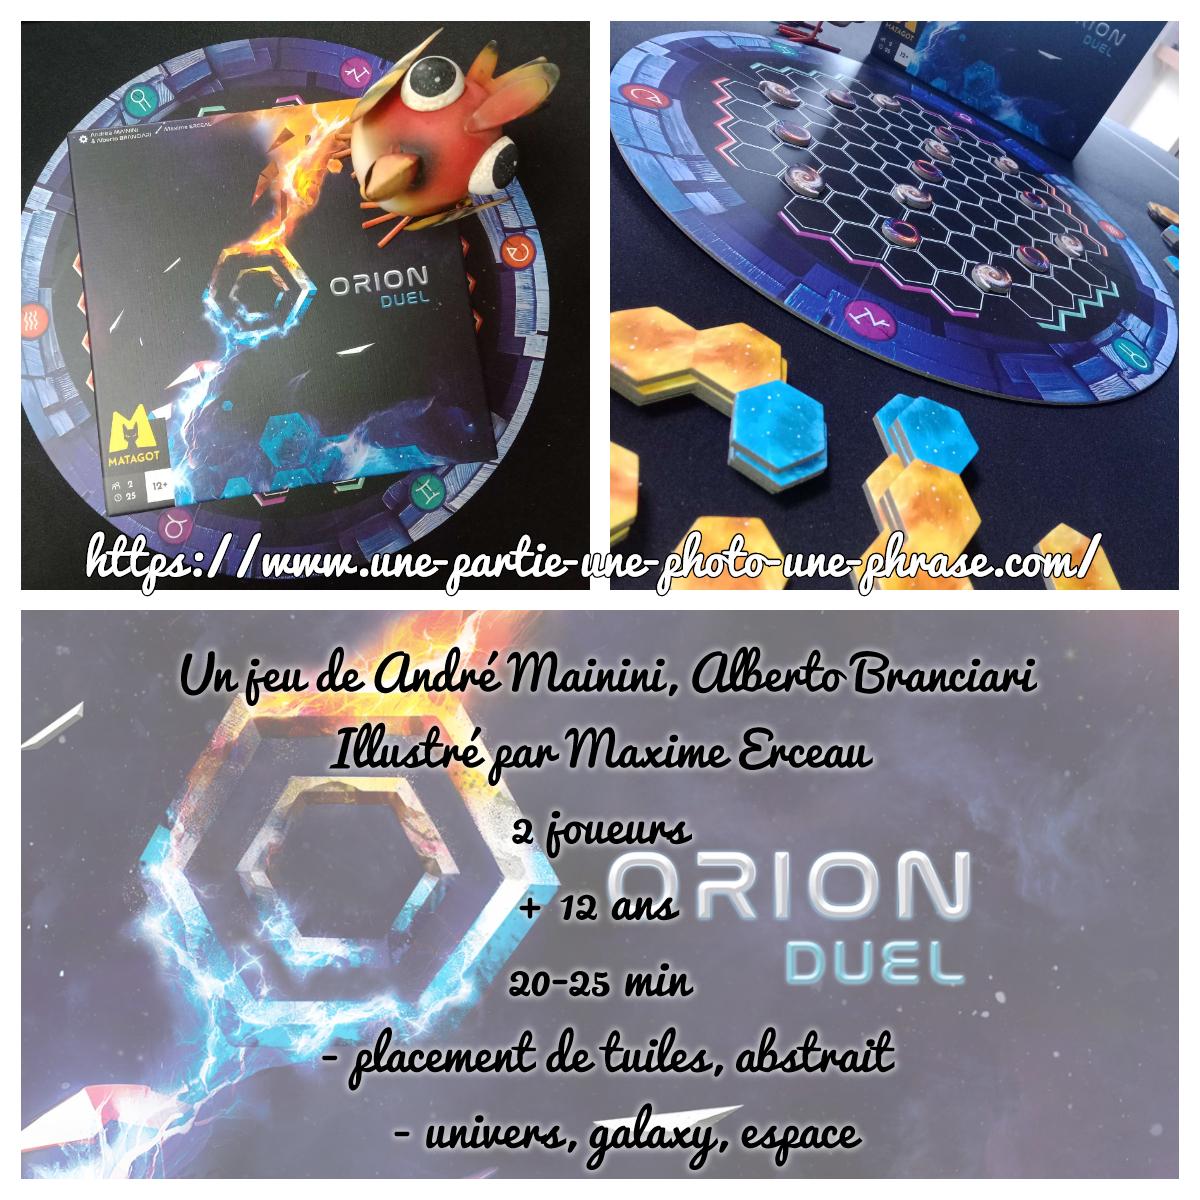 Orion duel